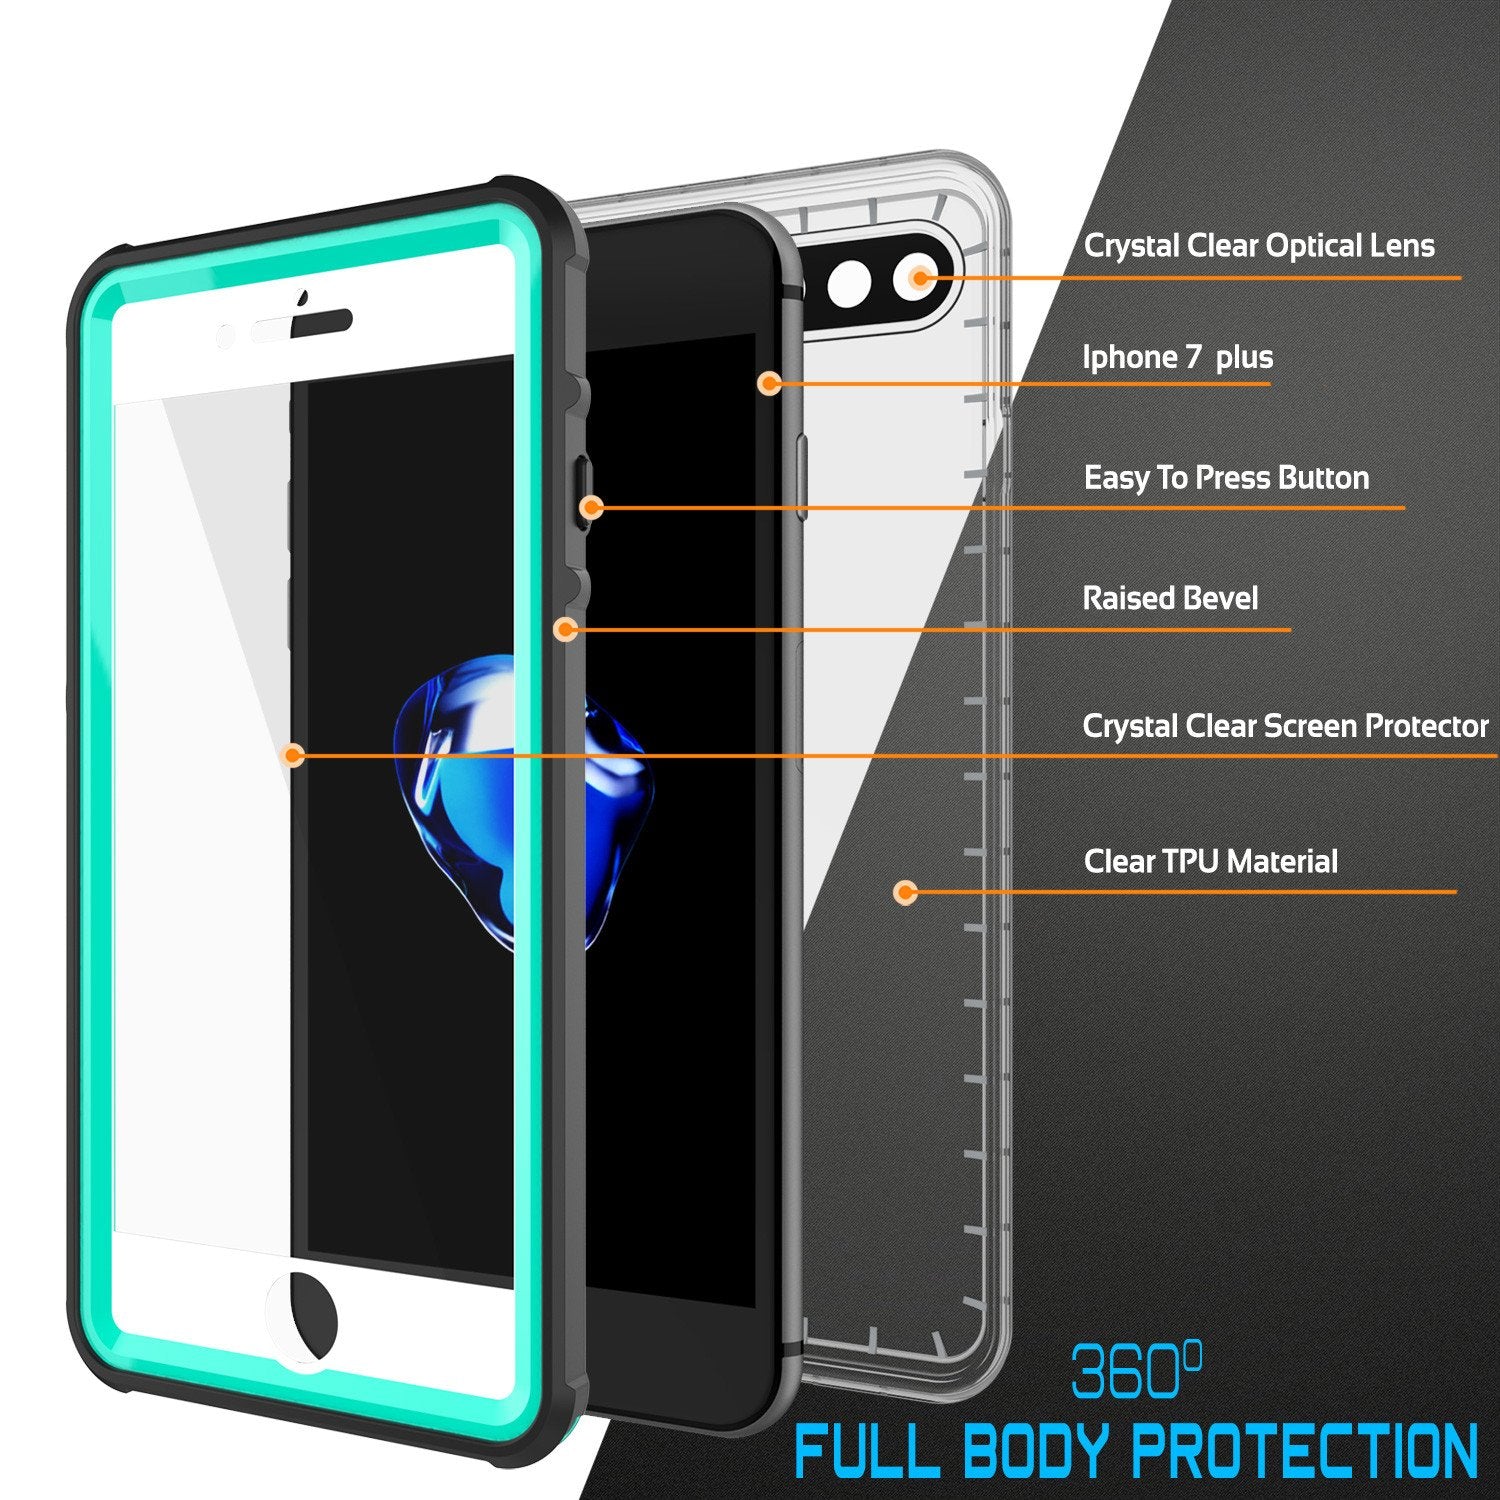 iPhone 7+ Plus Waterproof Case, PUNKcase CRYSTAL Teal W/ Attached Screen Protector  | Warranty